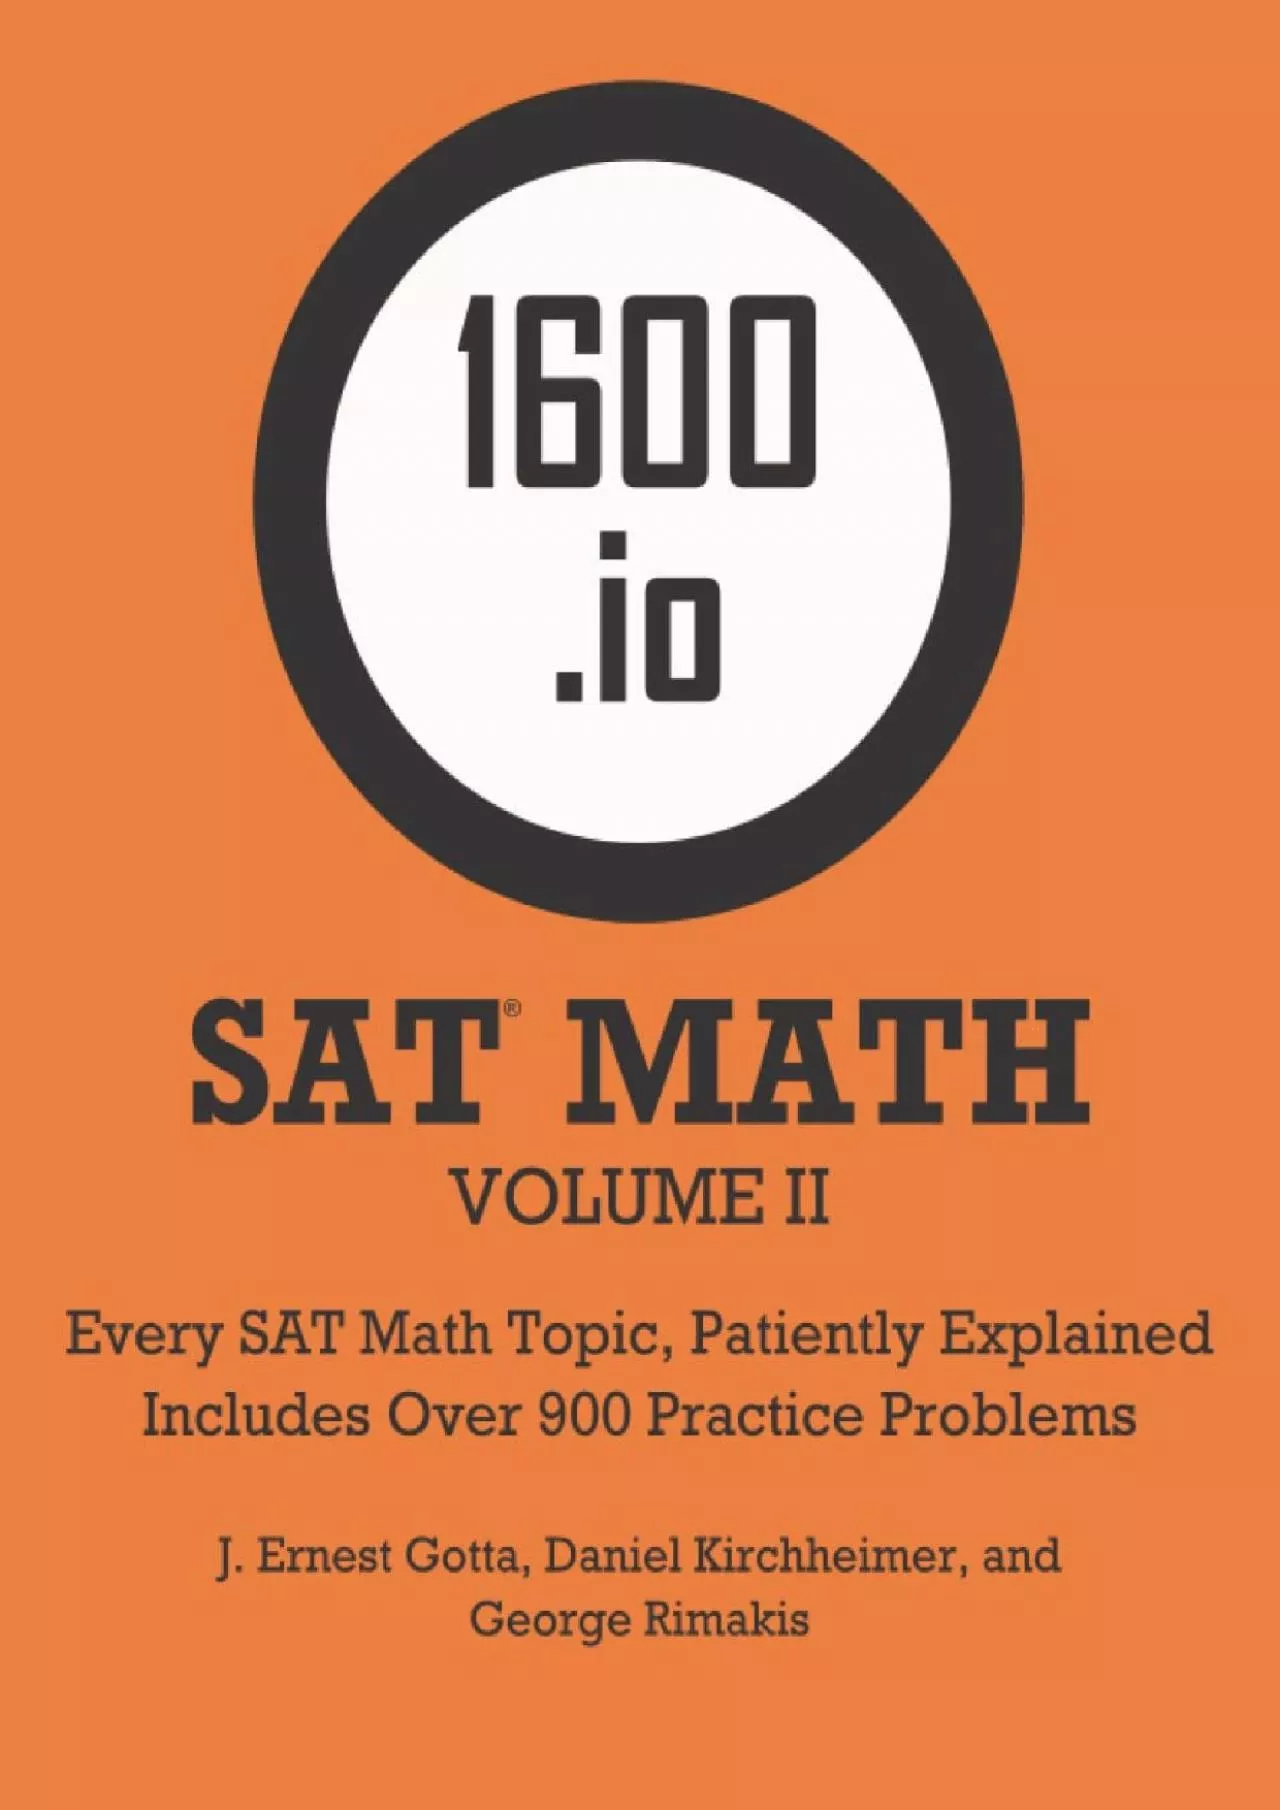 [DOWNLOAD] 1600.io SAT Math Orange Book Volume II: Every SAT Math Topic, Patiently Explained